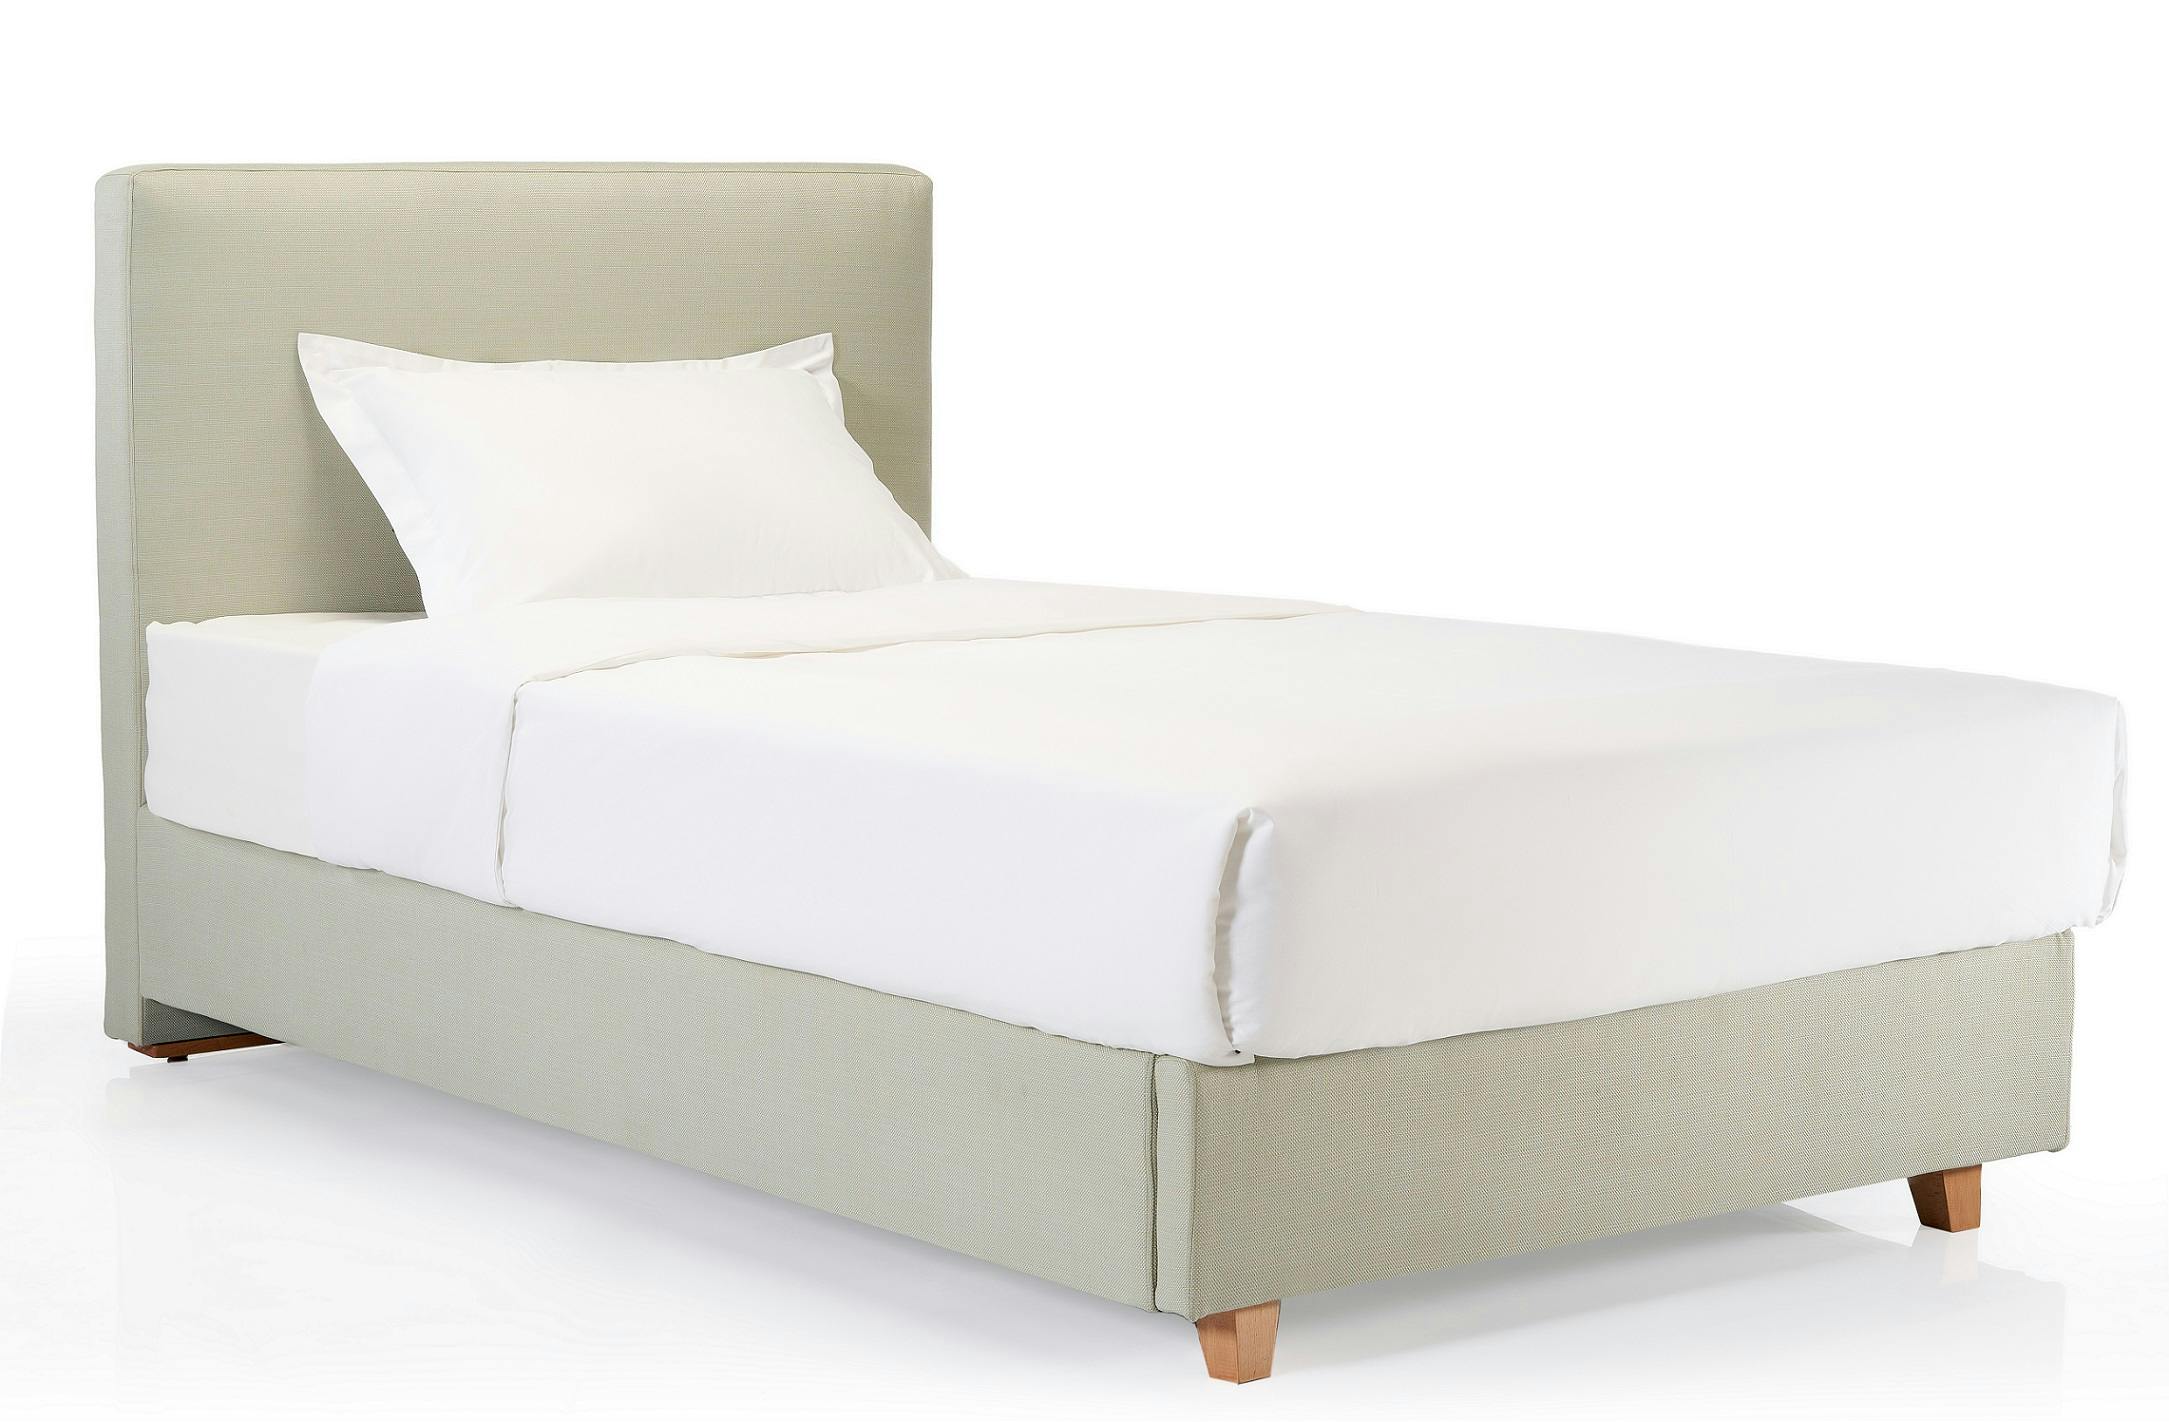 Simple Upholstered Bed with legs 120cm 0